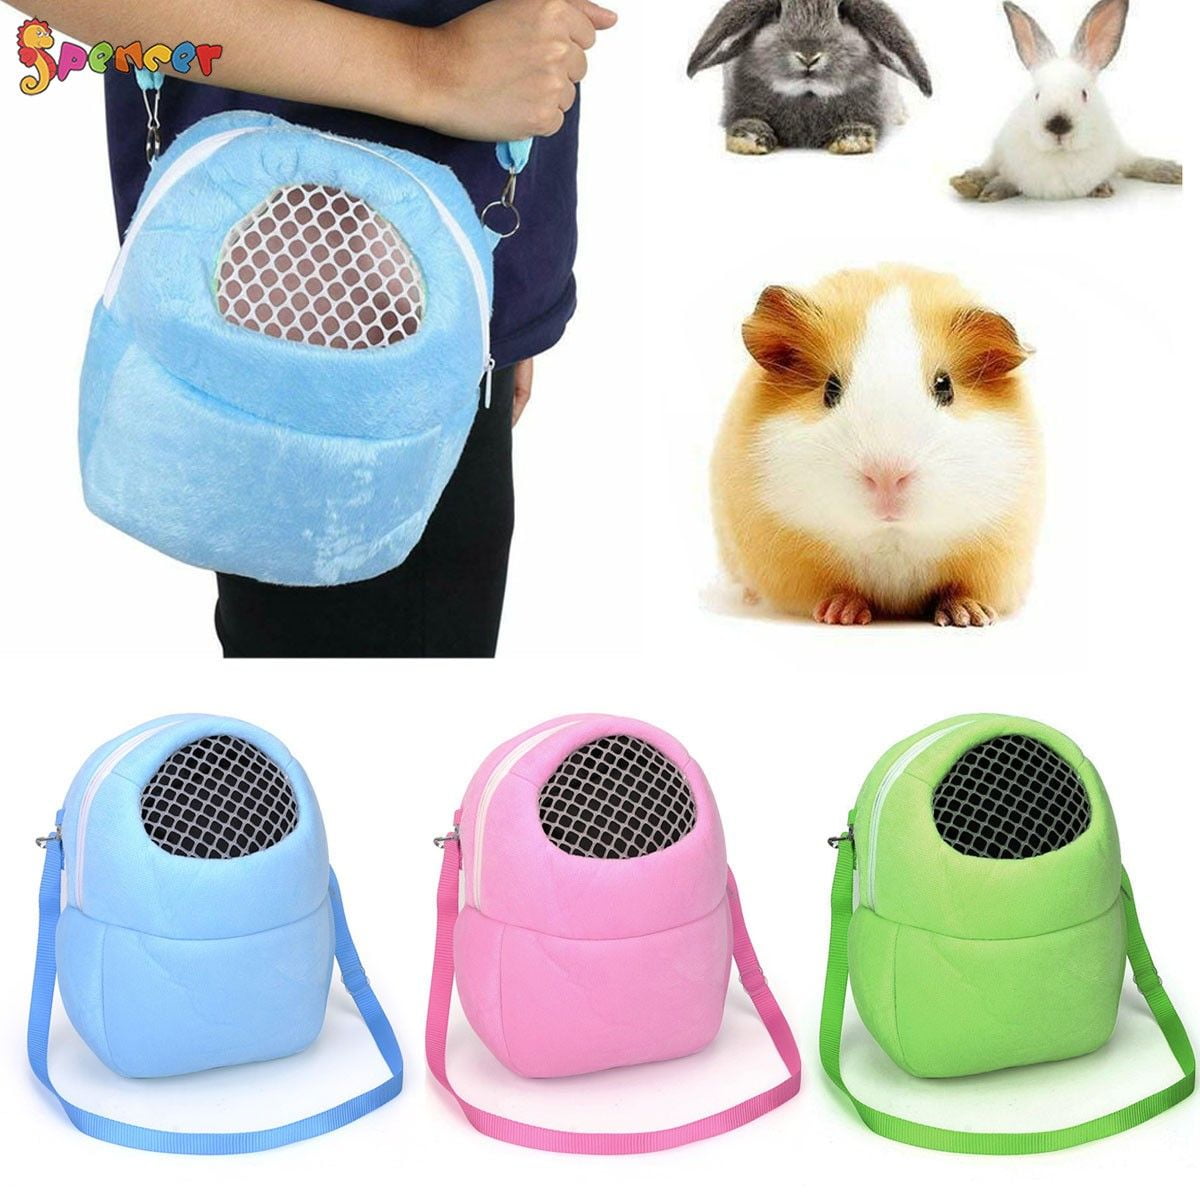 Guinea Pig Hamster Carrier Bag Small Animals Portable Outgoing Travel Bag Adjustable Shoulder Strap and Breathable Carrier Bag for Hedgehog Small Guinea Pig Large:9.45x9.45x5.5in, Coffee